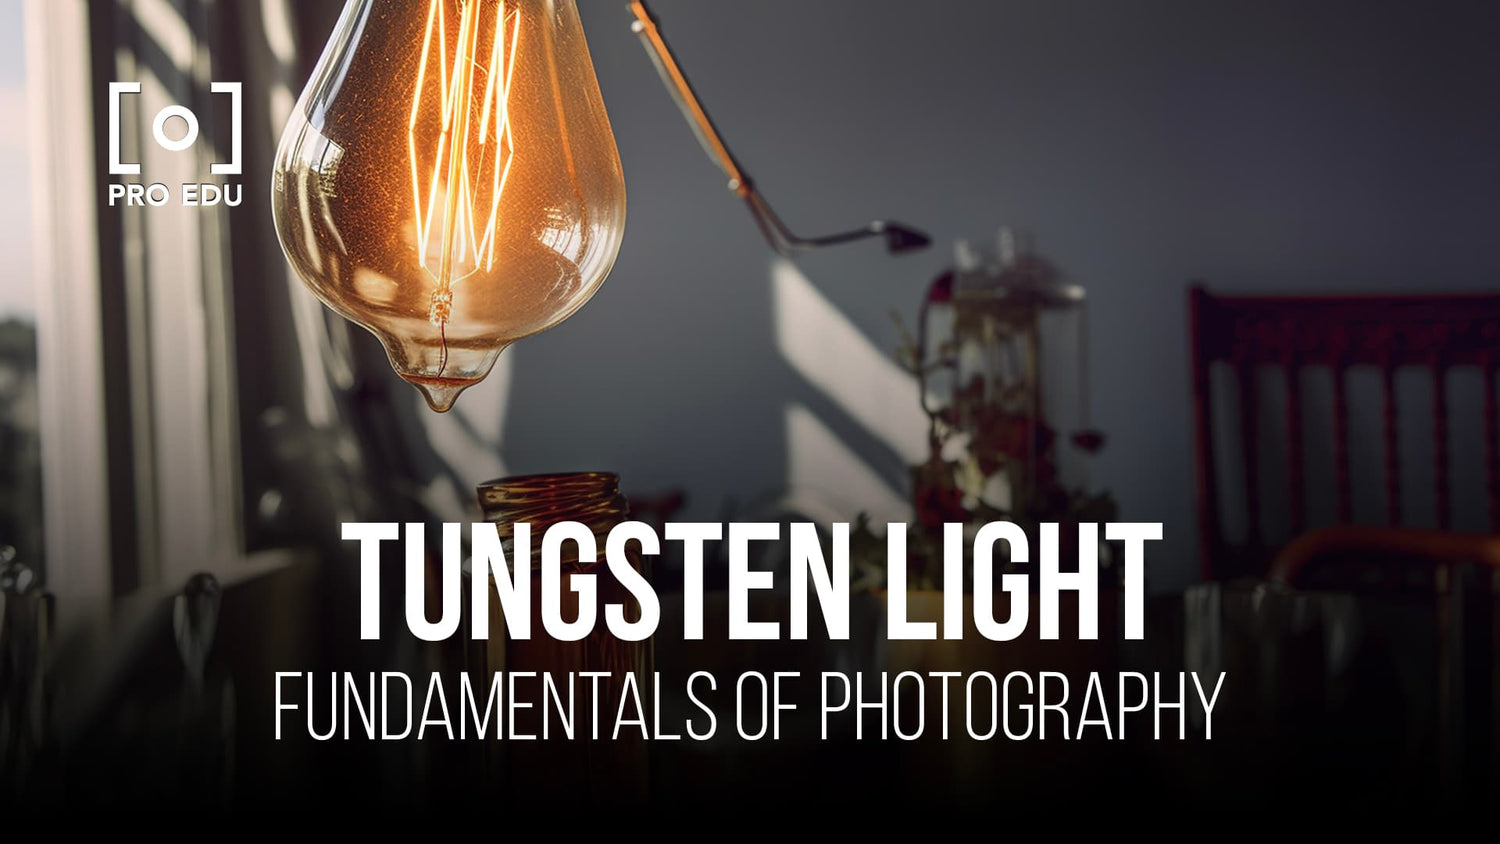 Mastering warm indoor lighting with tungsten light in photography